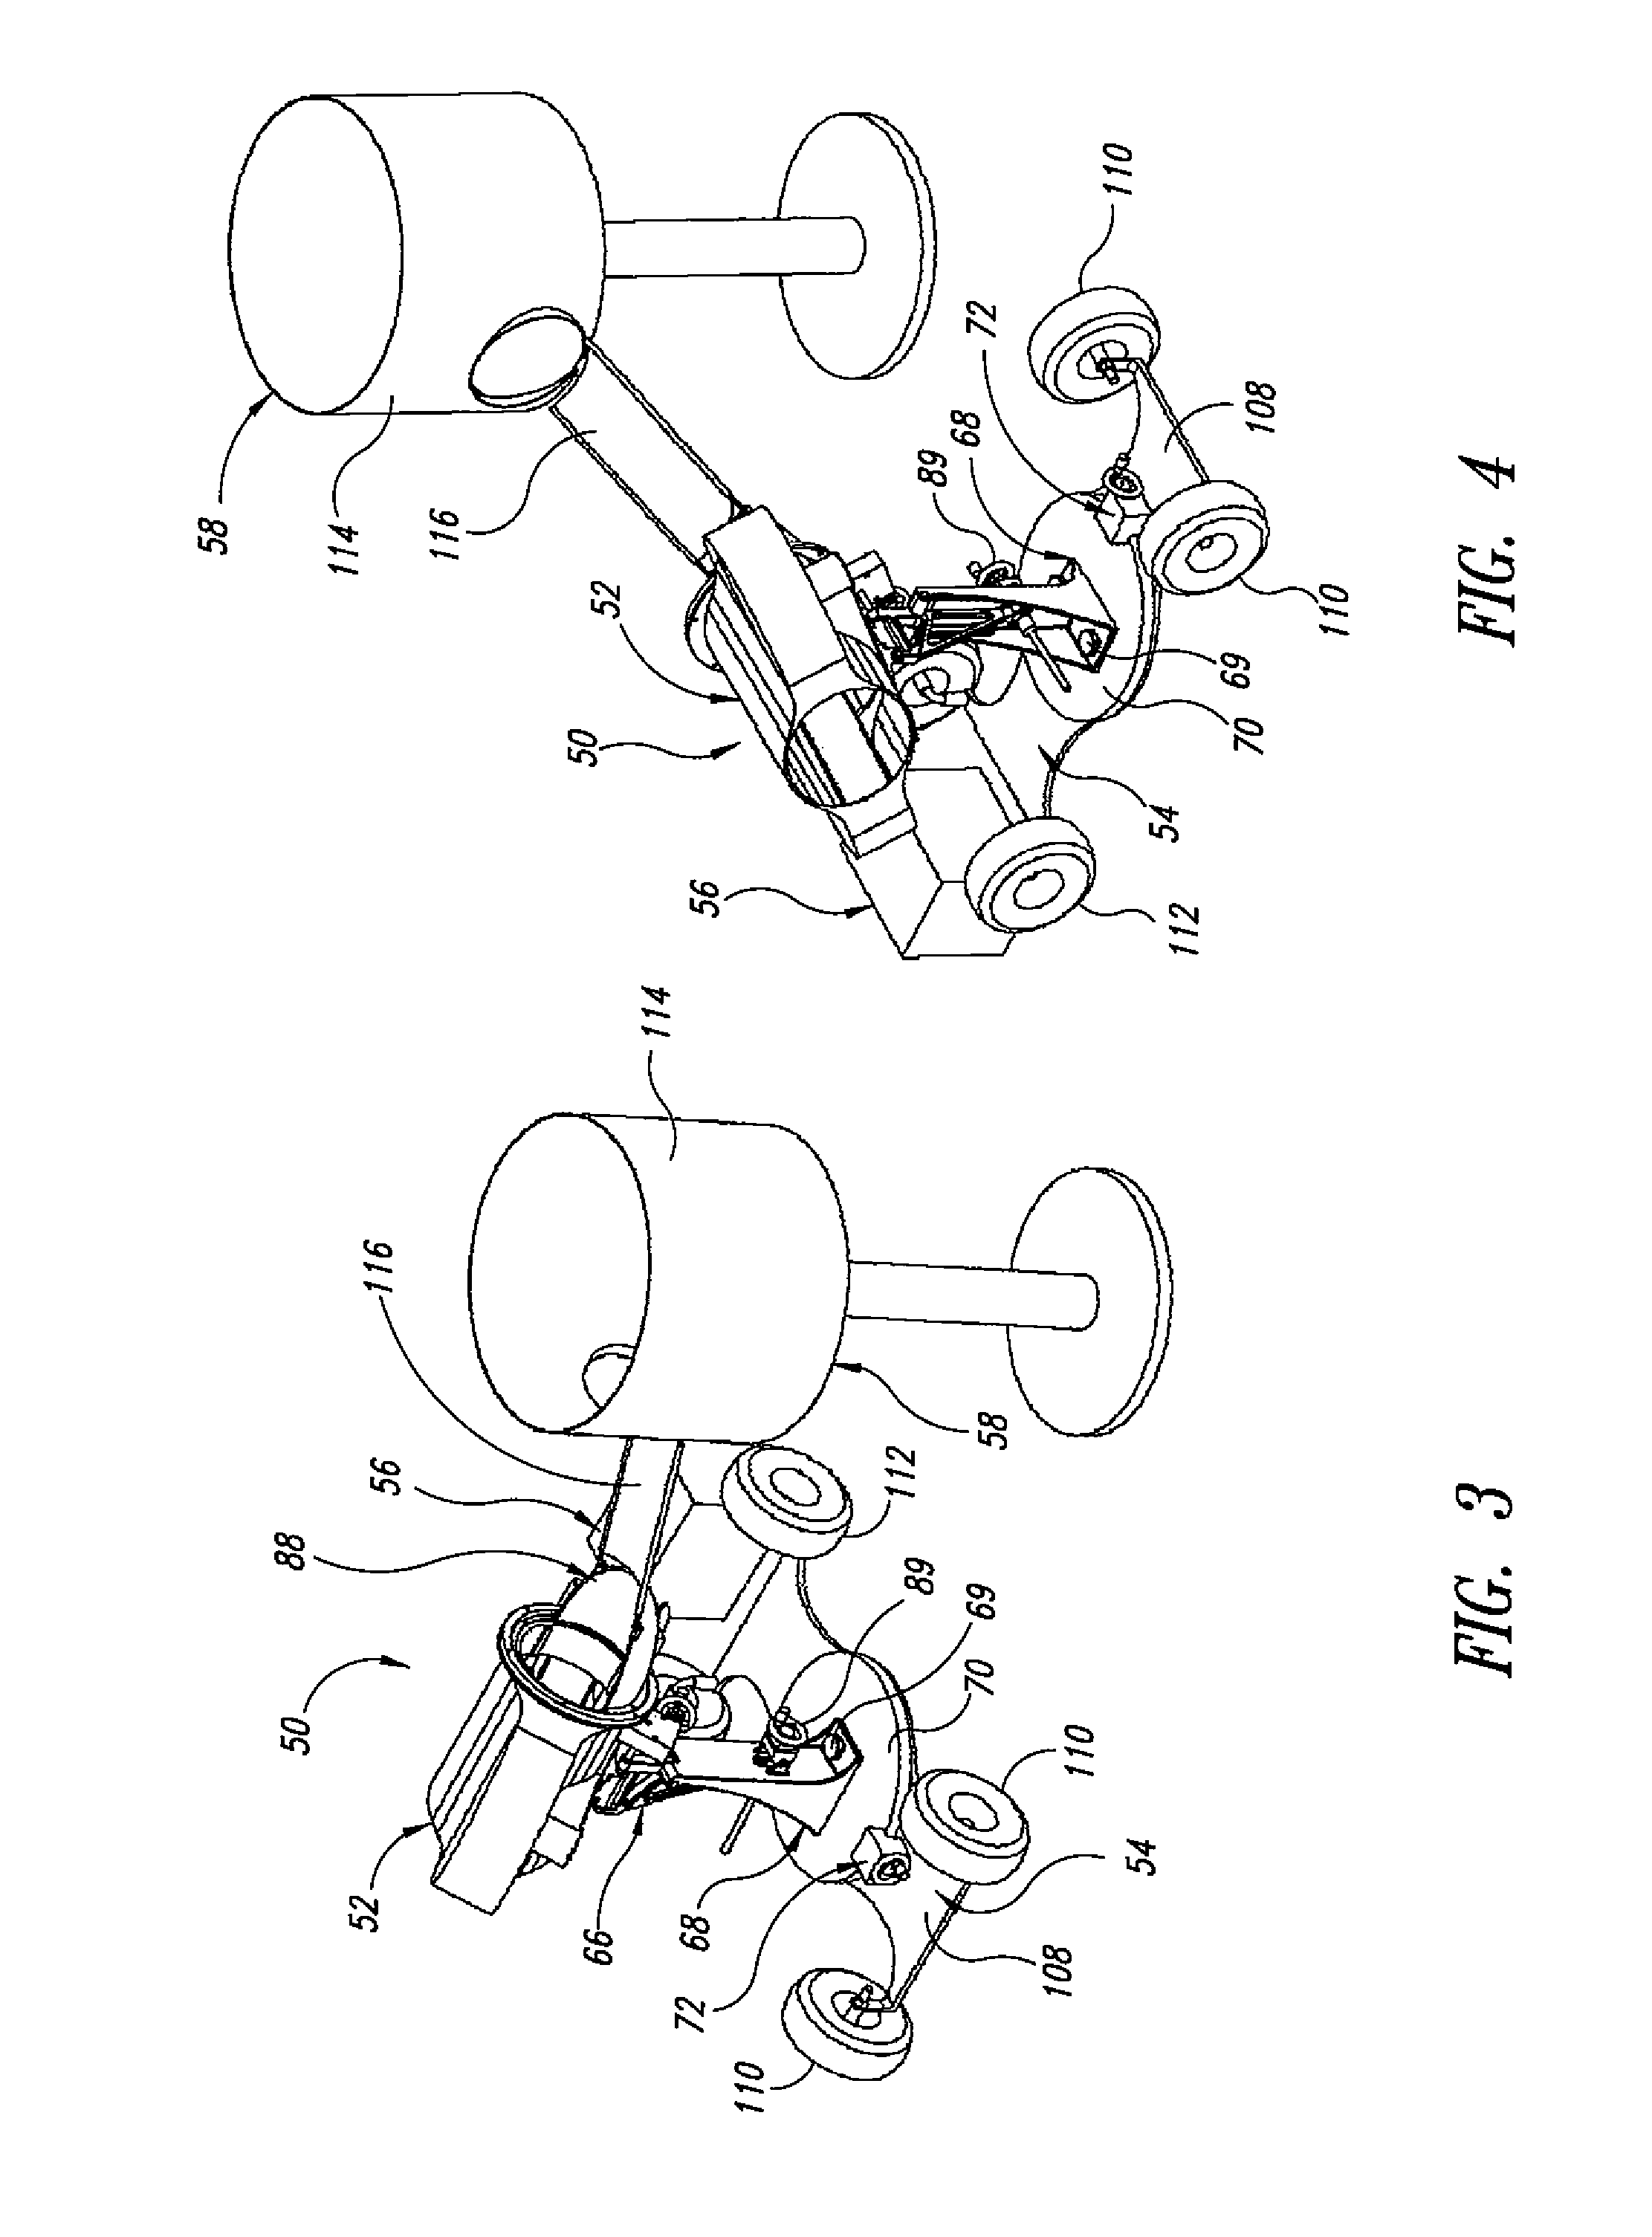 Soccer ball delivery system and method